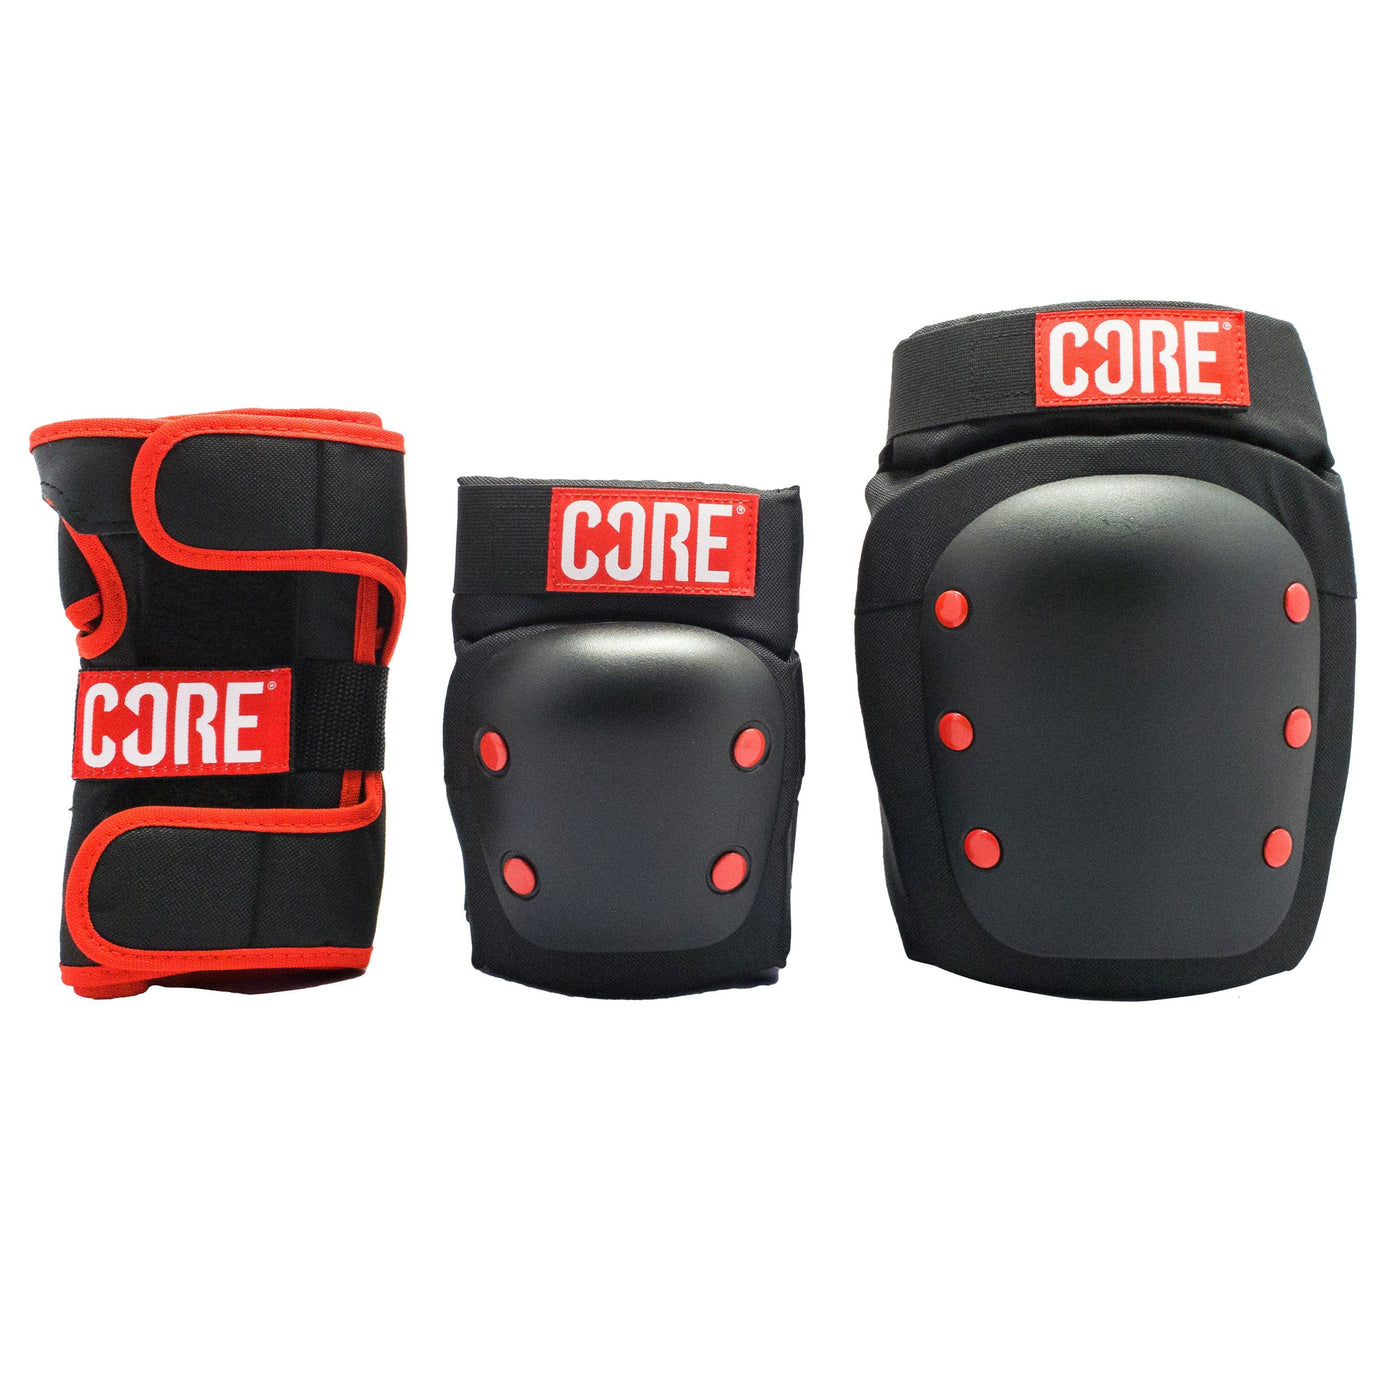 CORE Skateboard Protective Gear Pad Set Red I Skateboard Protective Gear